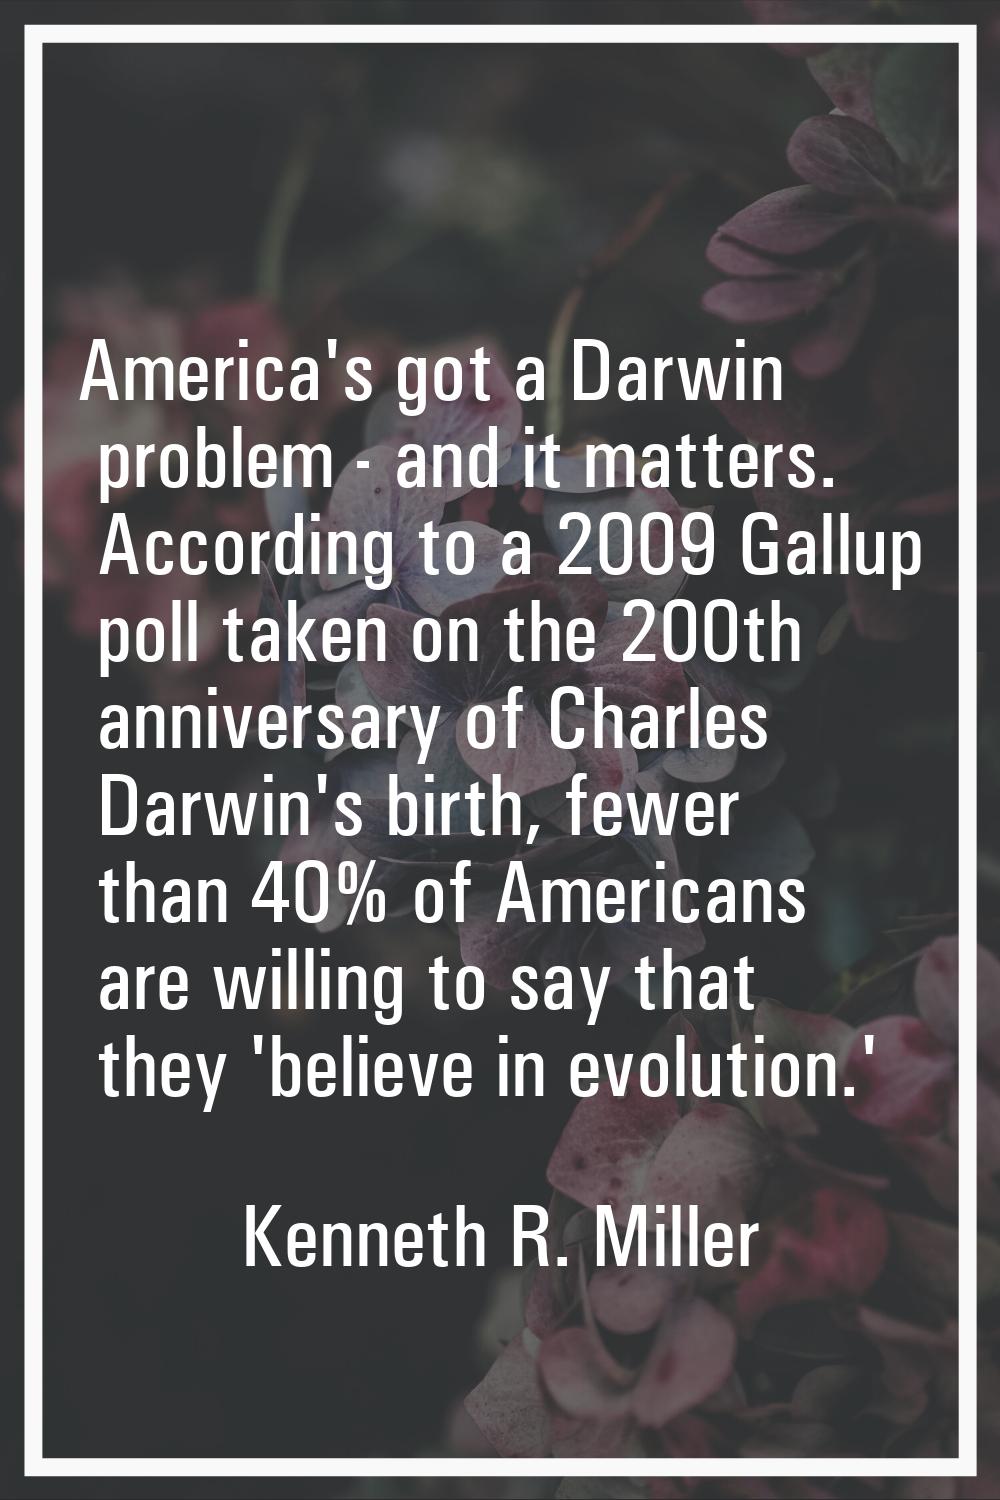 America's got a Darwin problem - and it matters. According to a 2009 Gallup poll taken on the 200th